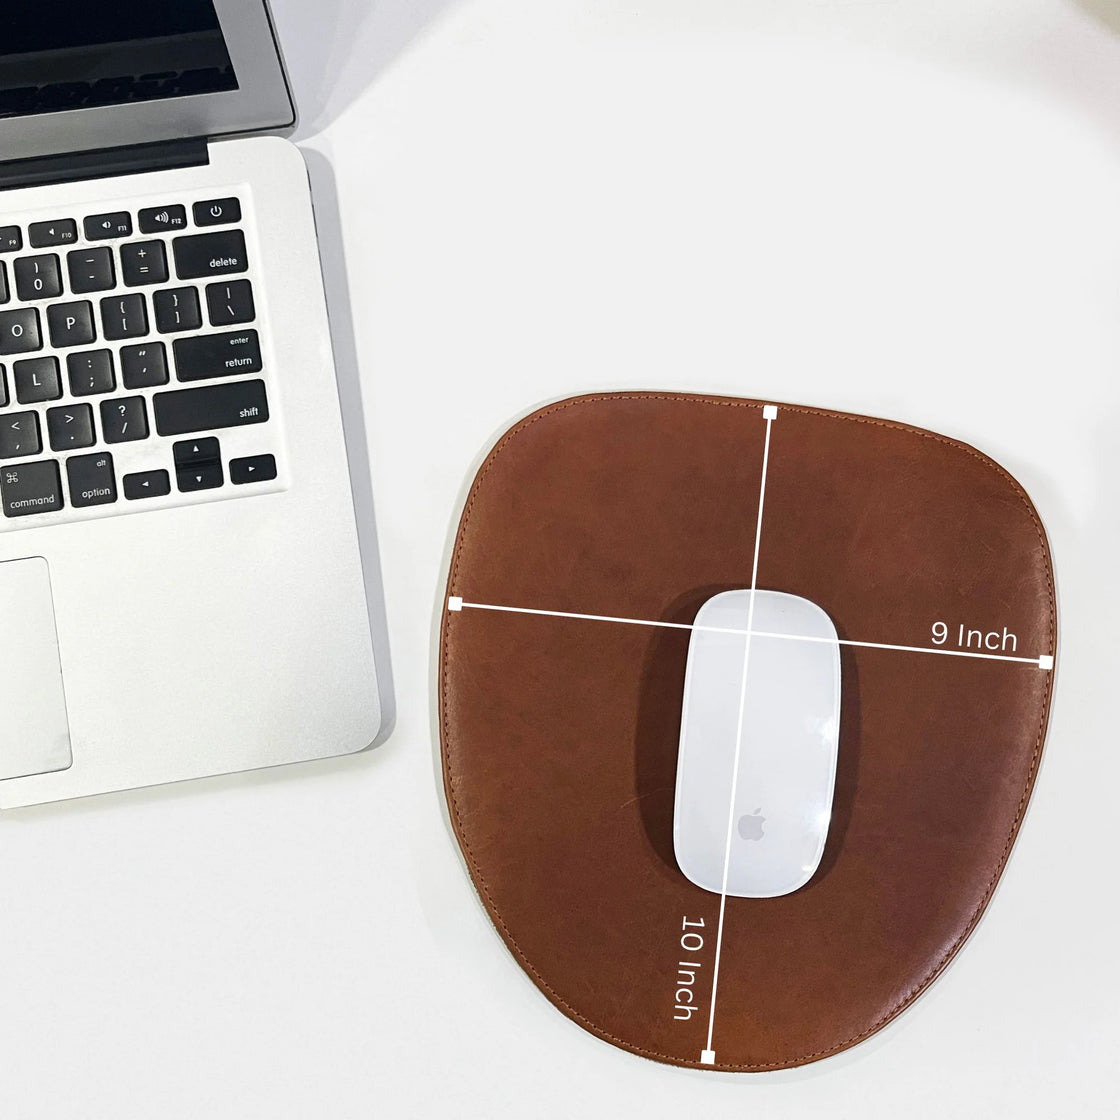 Leather Mouse Pad - Desk Pad for Computers, Laptop, Office & Home